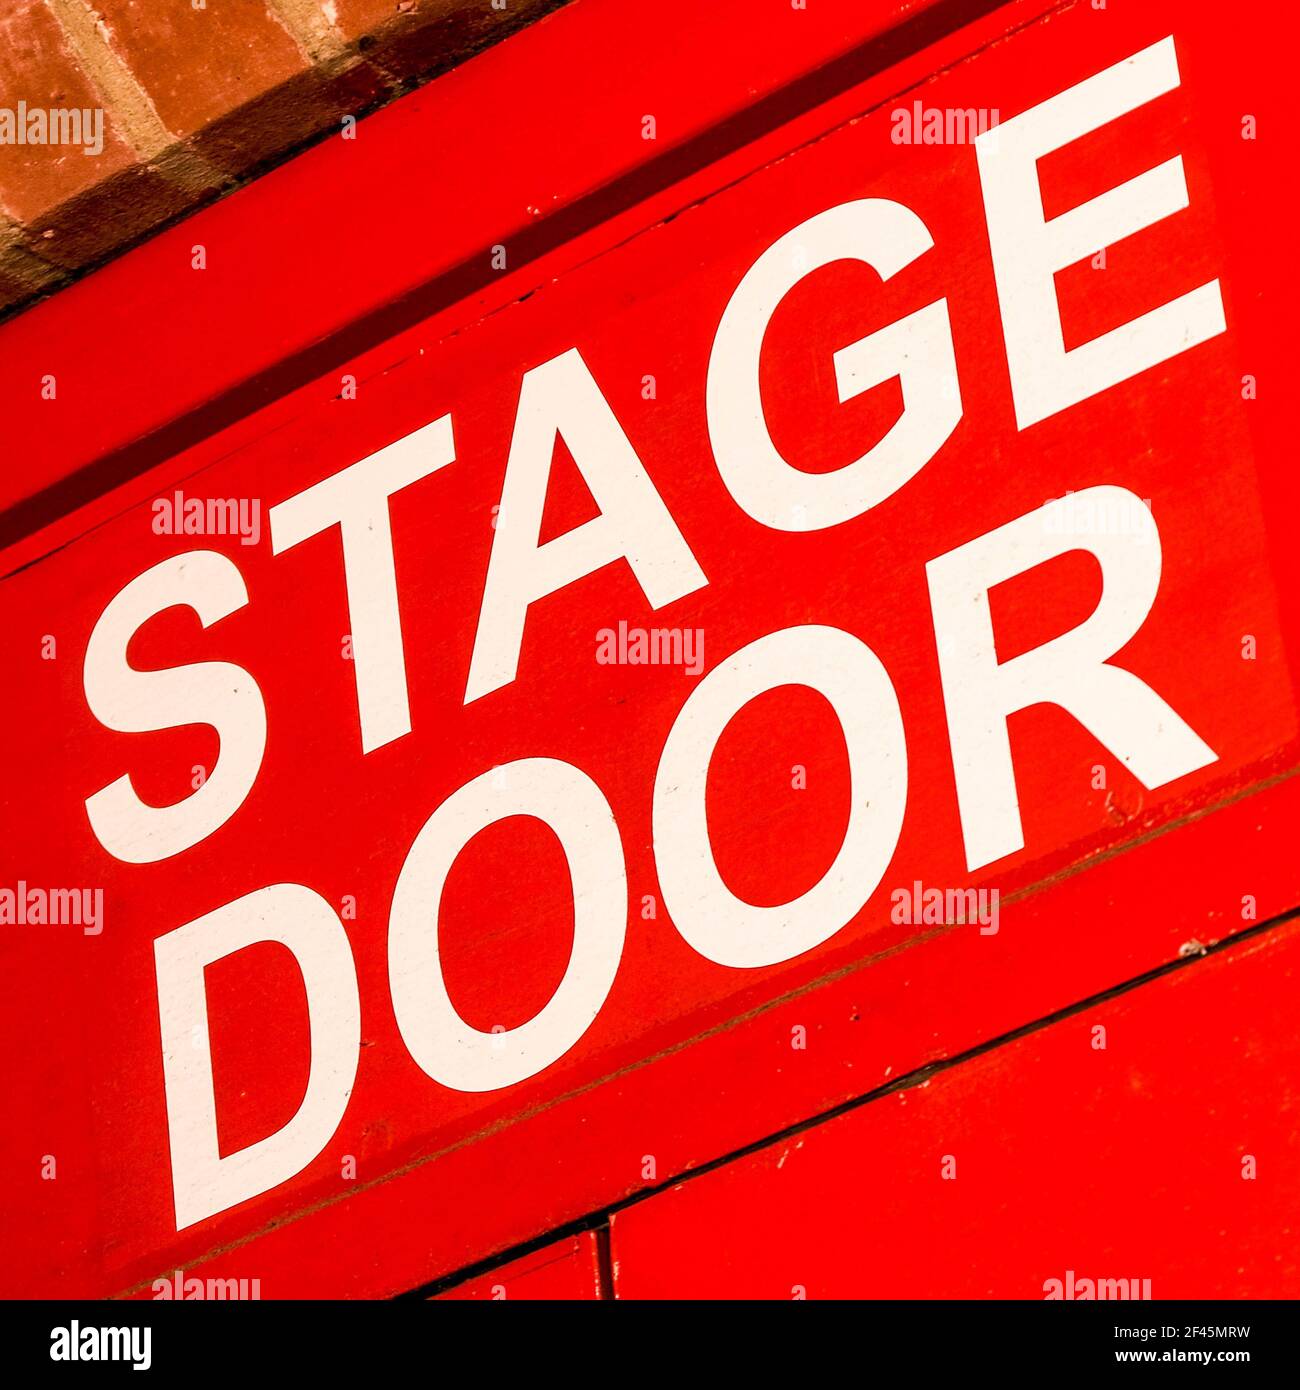 London UK, March 19 2021, Graphic Image Of A Closed Theatre Stage Door During Covid-19 Coronavirus Lockdown Stock Photo